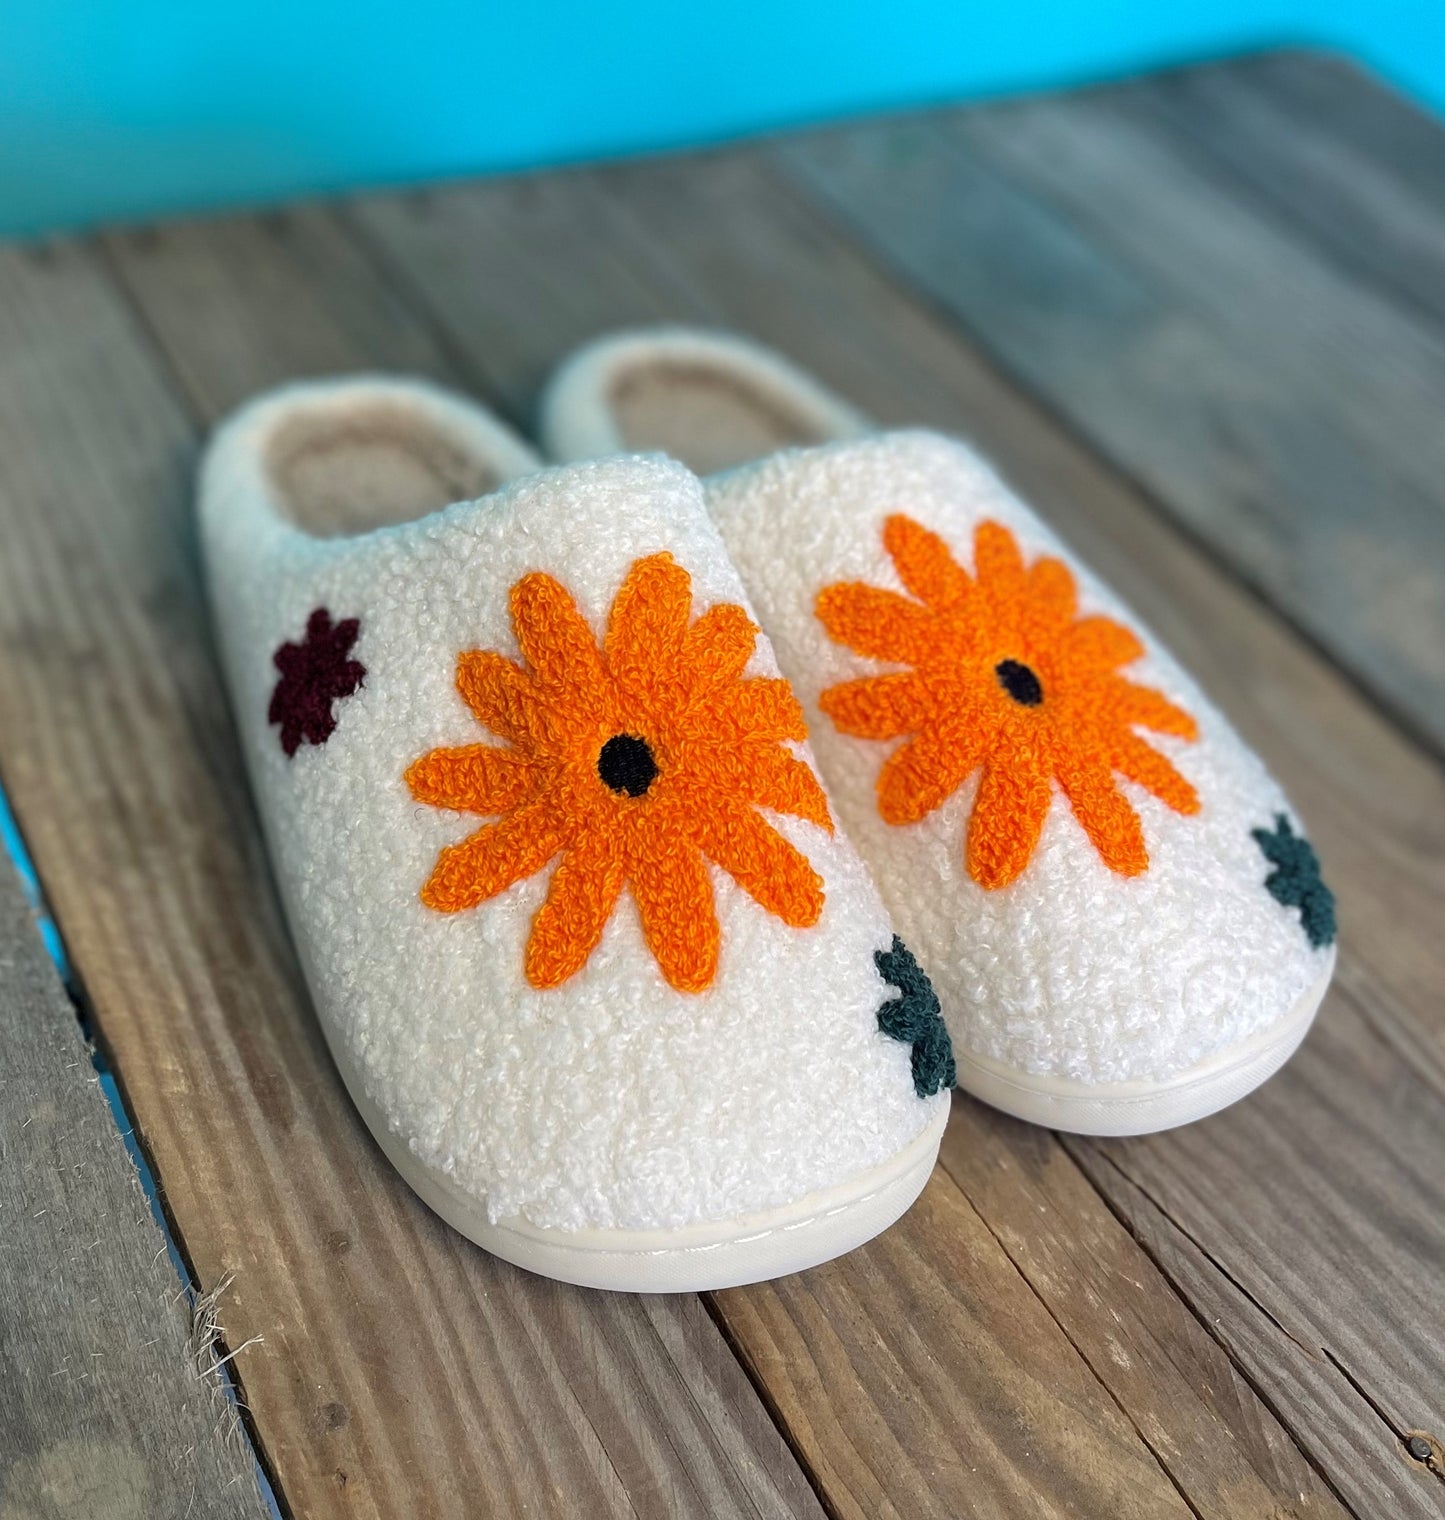 Cozy & Cute House Slippers